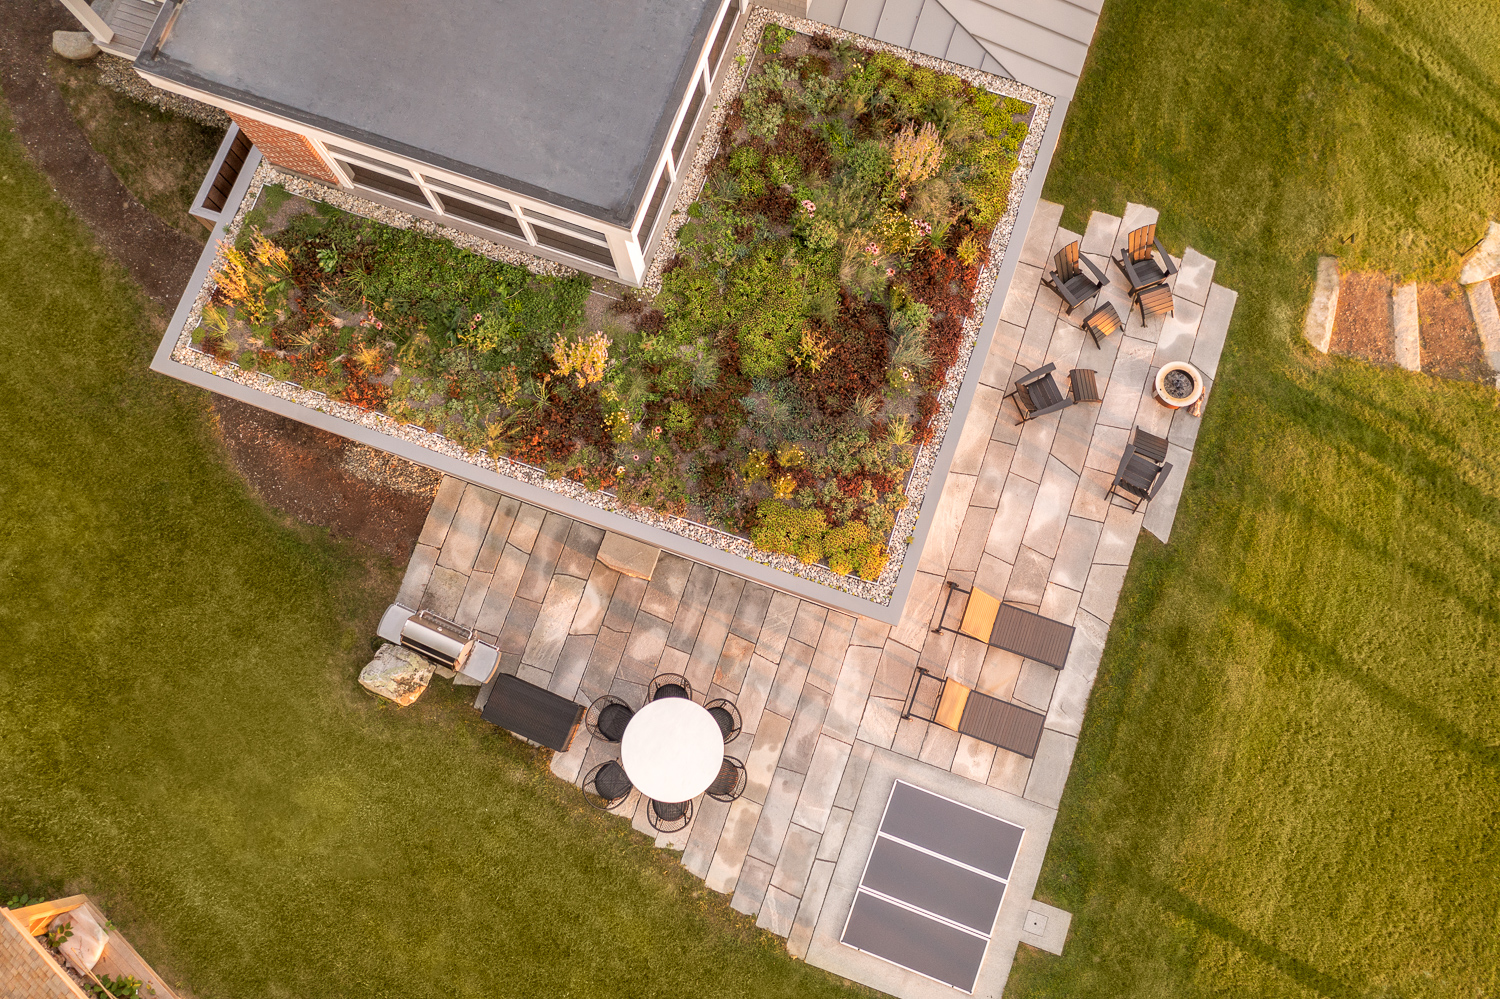 A view looking down on the green roof and patio